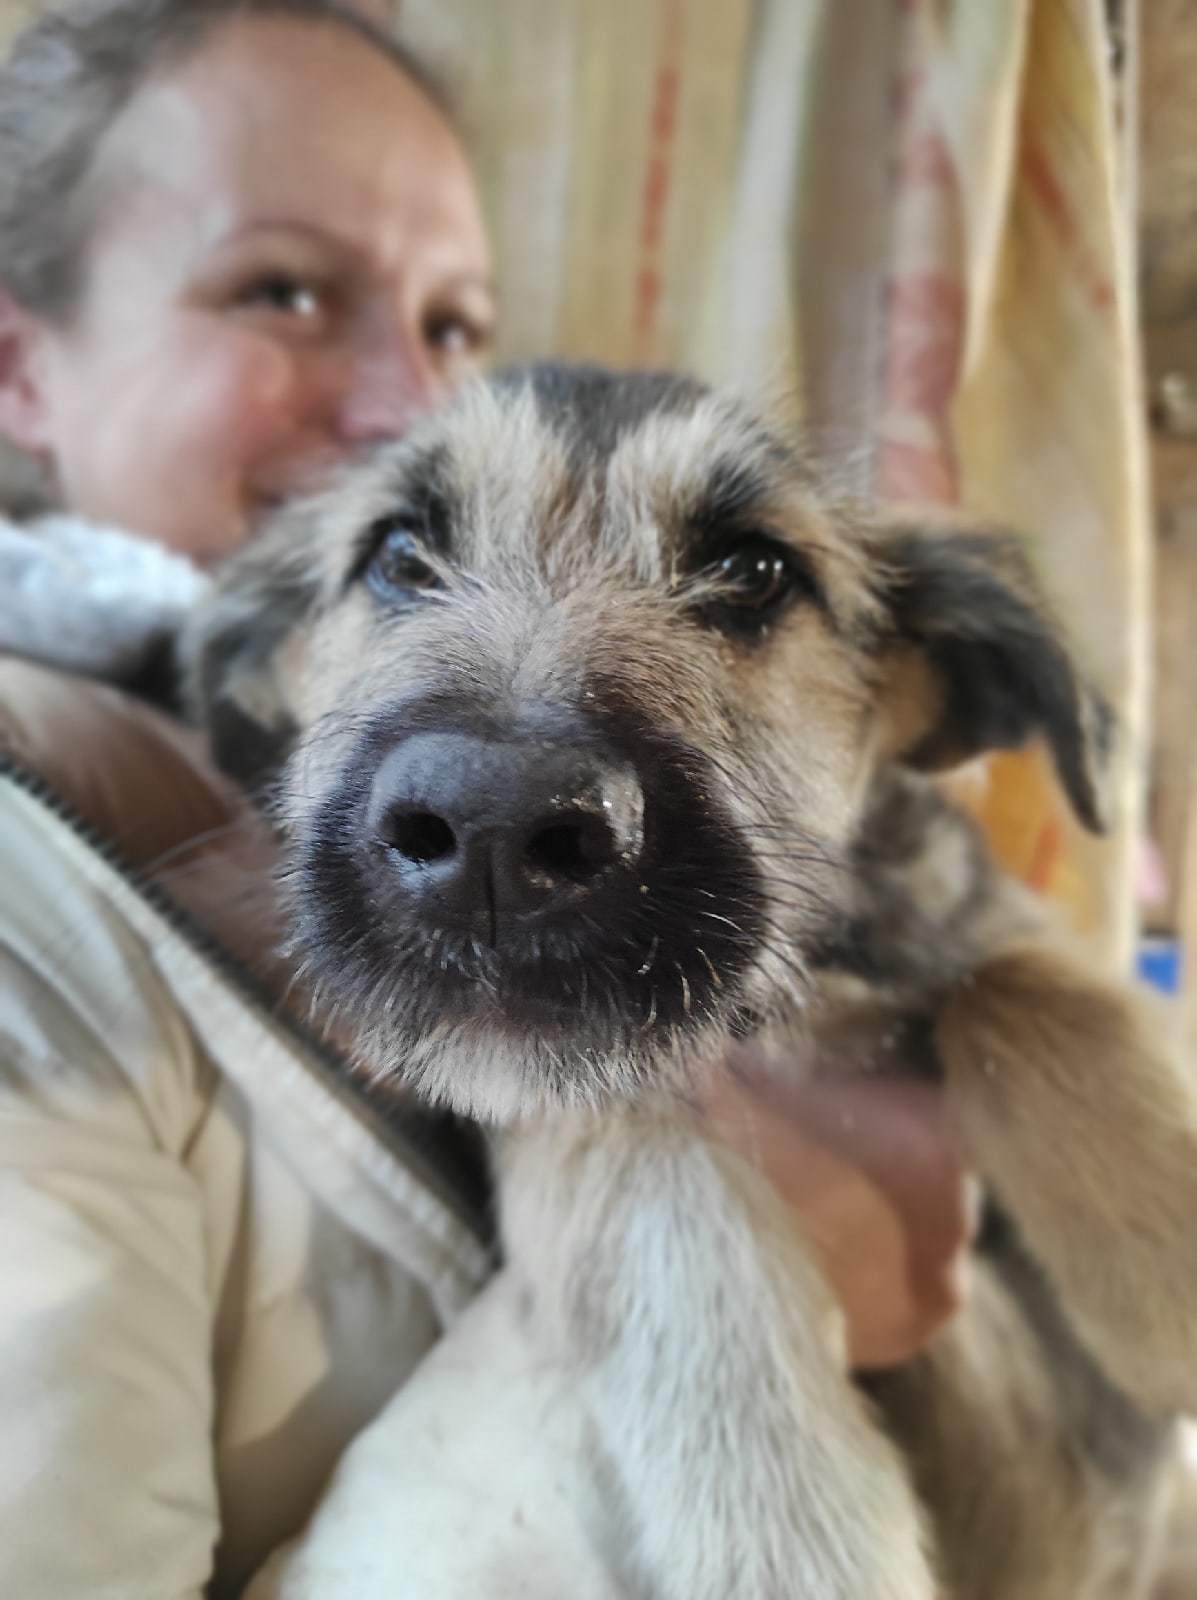 Bearded puppies in good hands - No rating, In good hands, I will give, Puppies, Beard, Dog, Pets, Moscow region, , Sergiev Posad, Moscow, Male, Muzzle, Pets, Dogs and people, Pet, Young, Toddlers, Longpost, Children